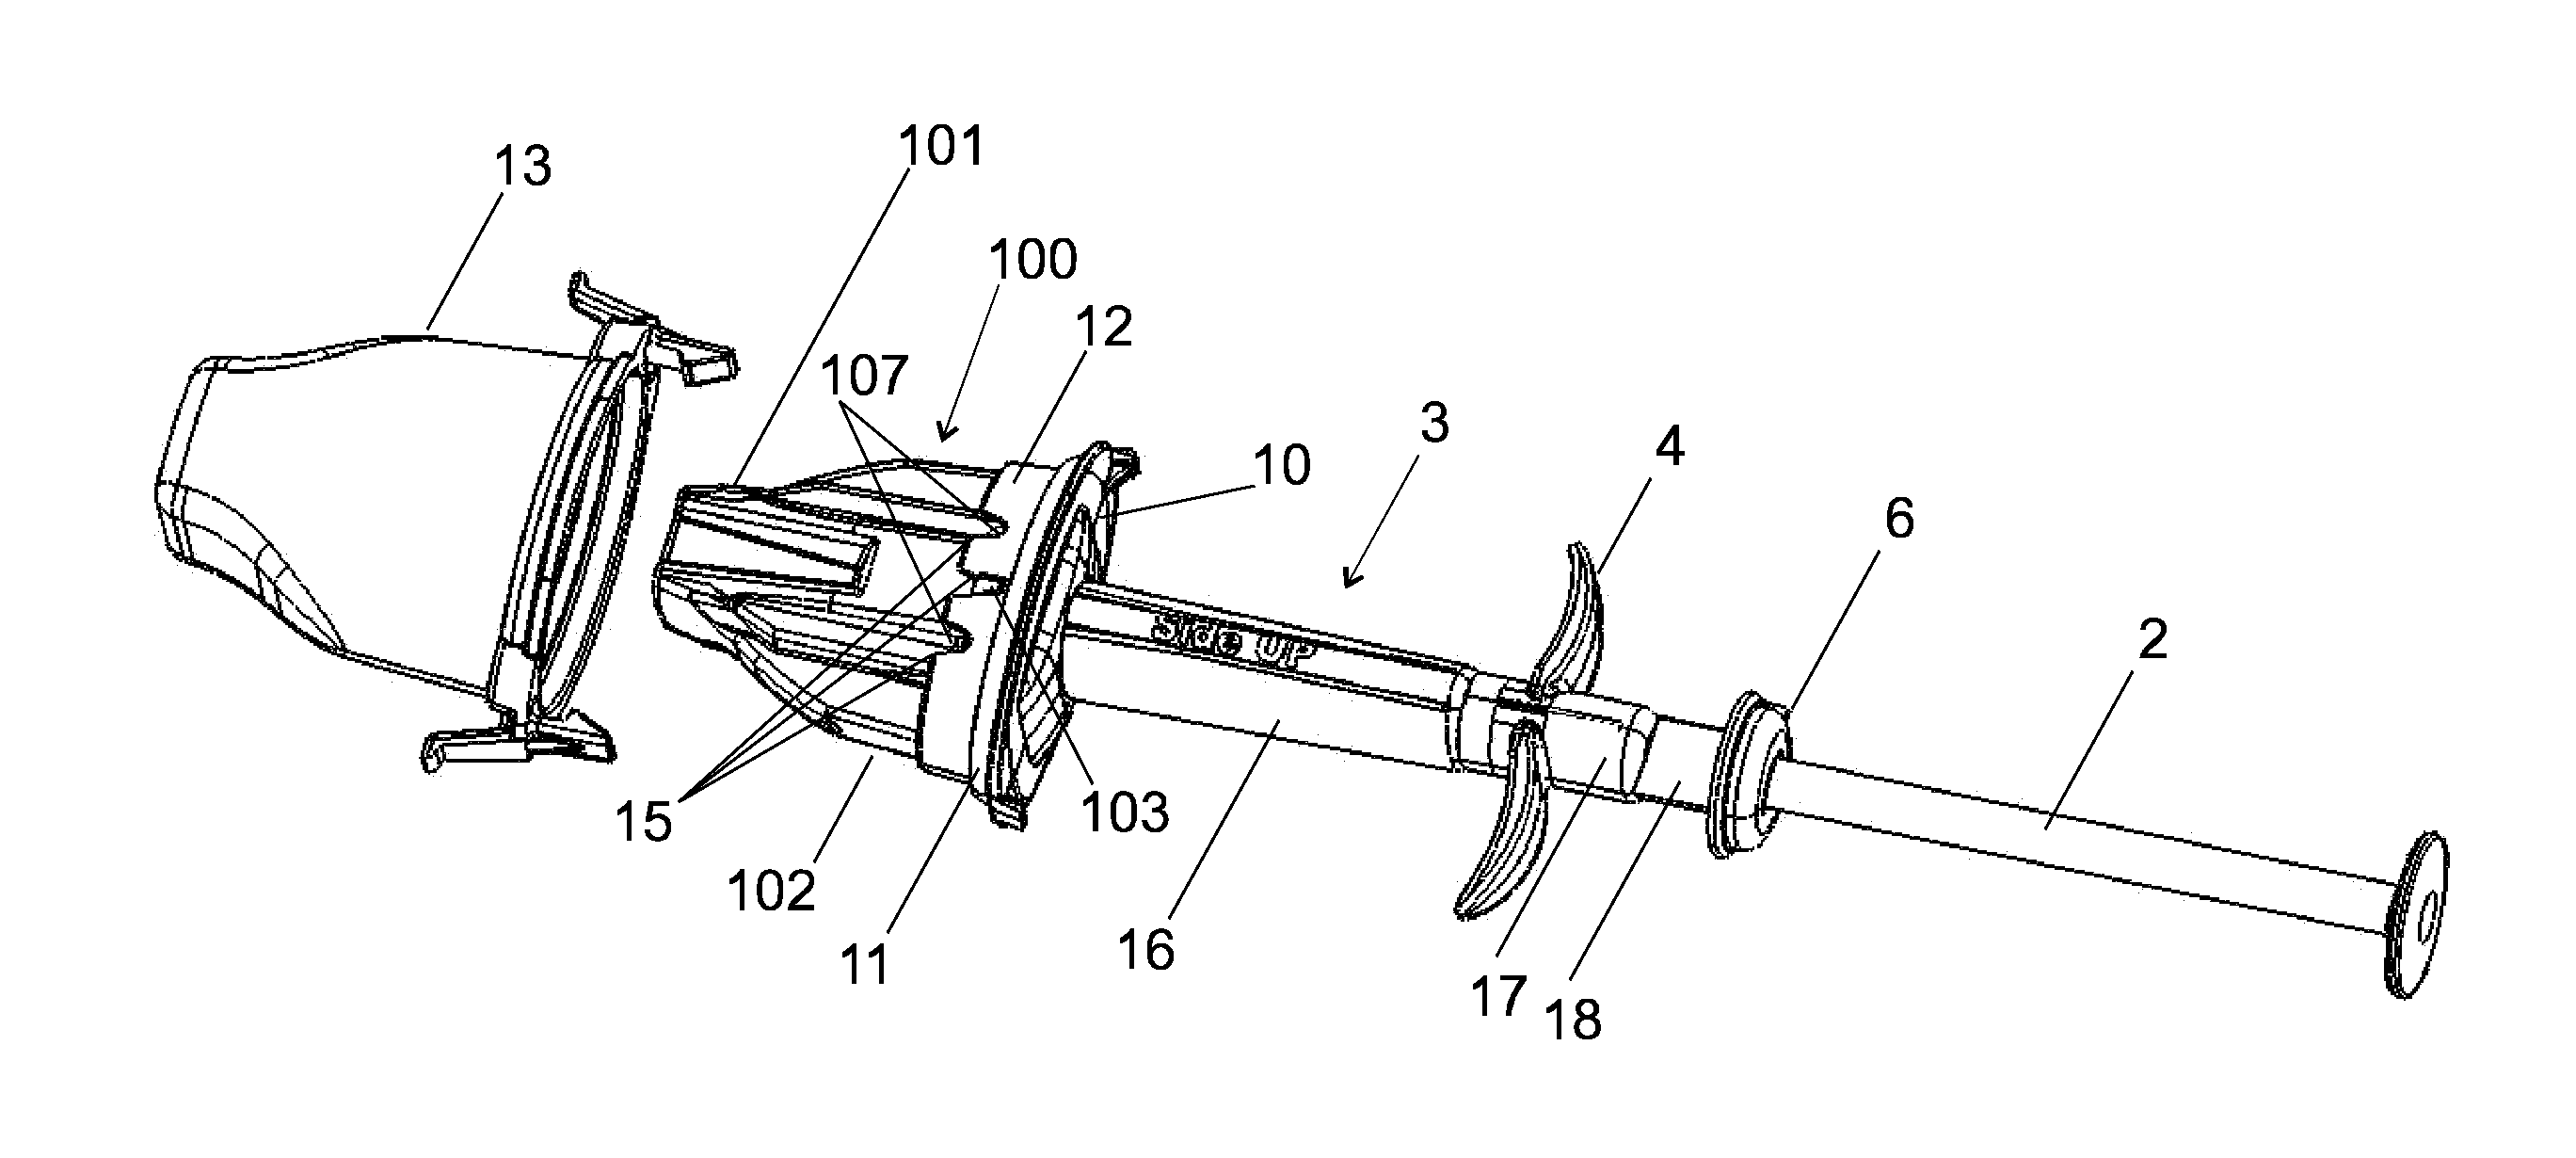 Device for holding folding and injecting an intraocular lens